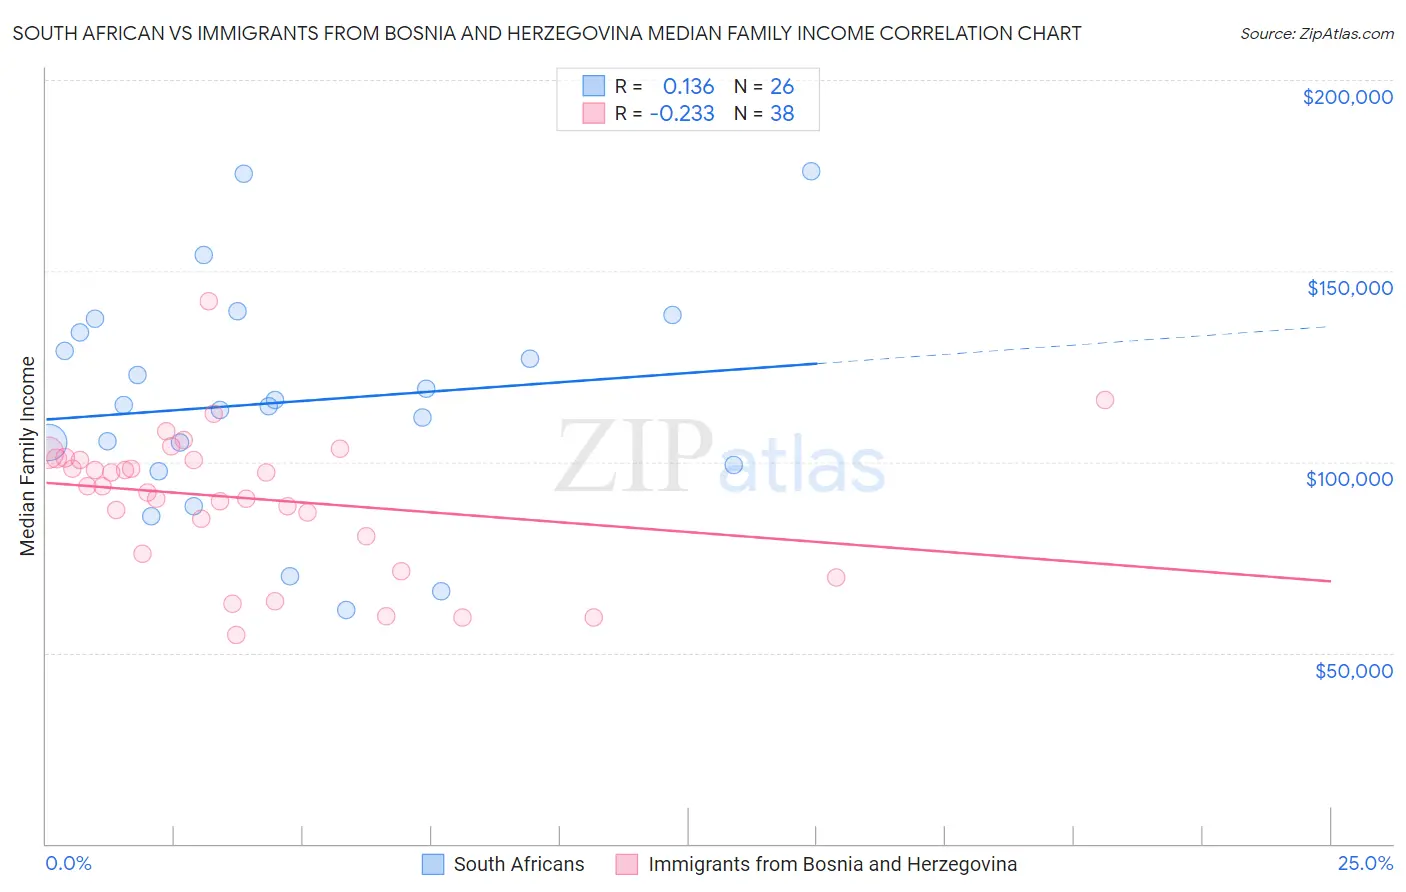 South African vs Immigrants from Bosnia and Herzegovina Median Family Income